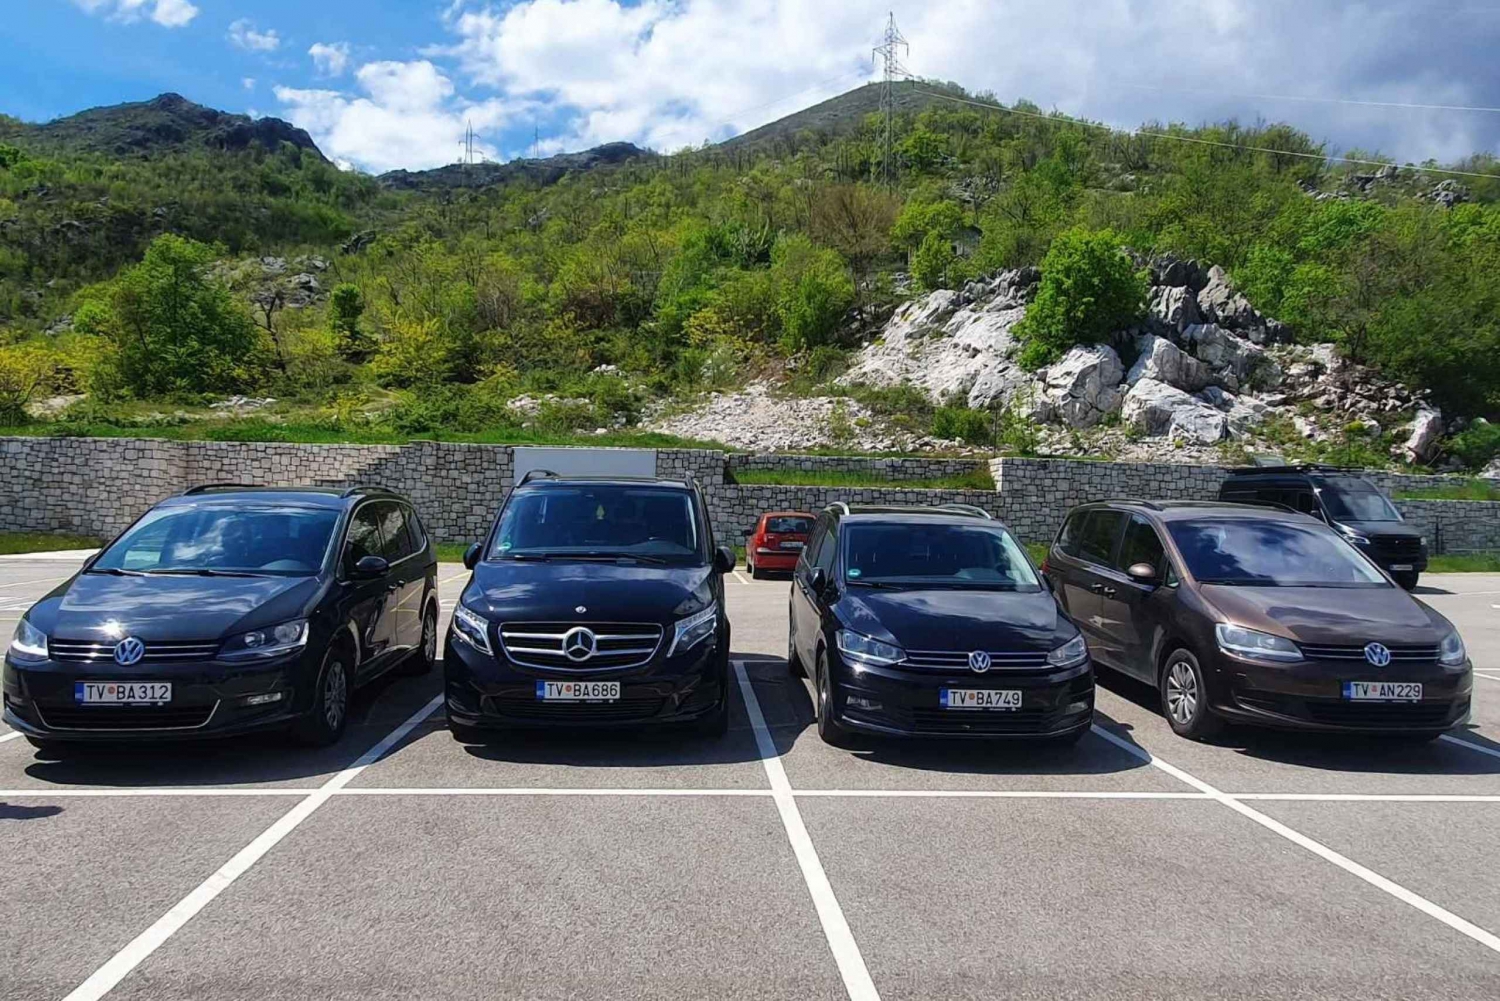 Private transfer from Budva to Dubrovnik airport